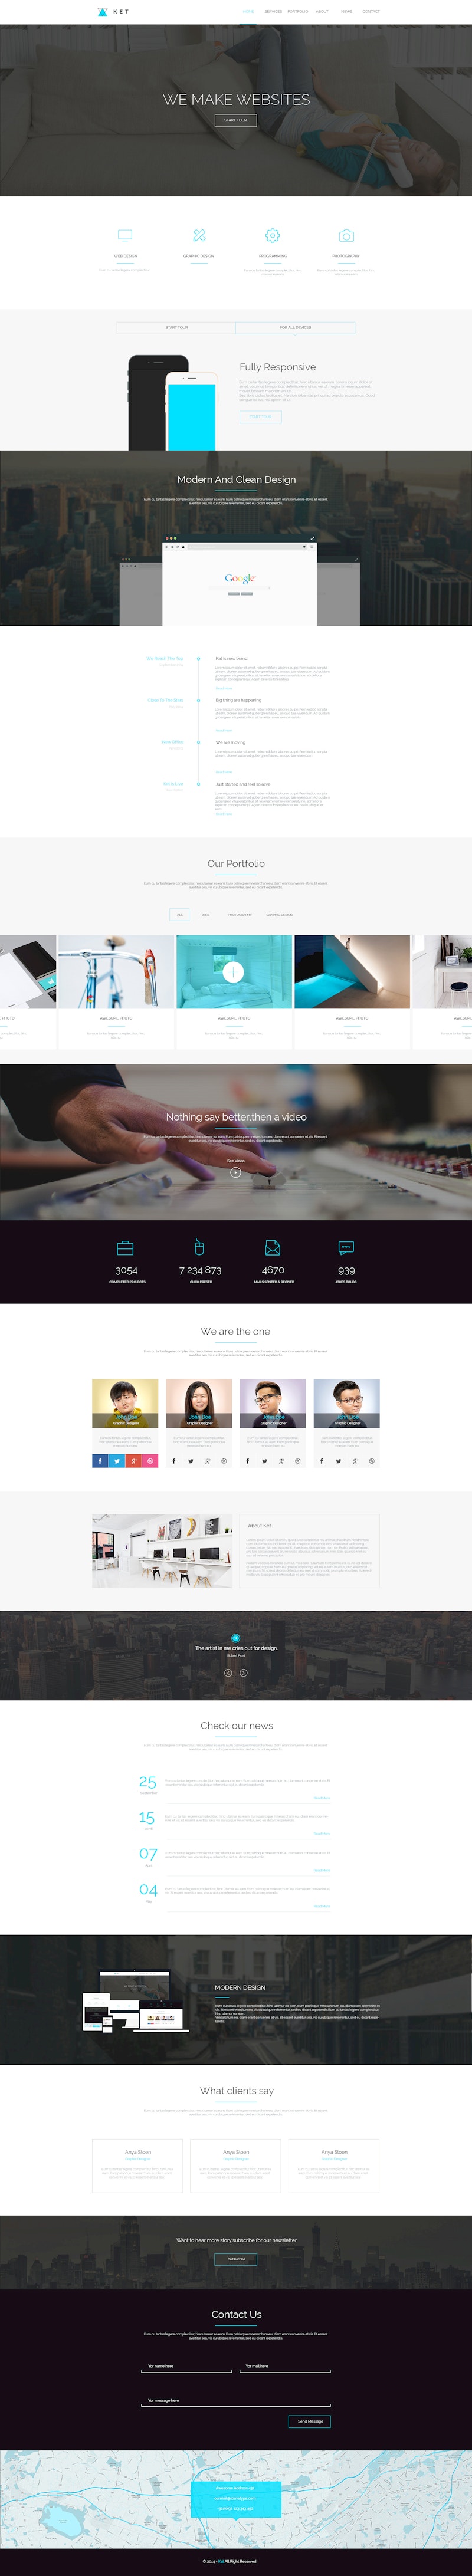 Ket - Single Page PSD Web Template preview